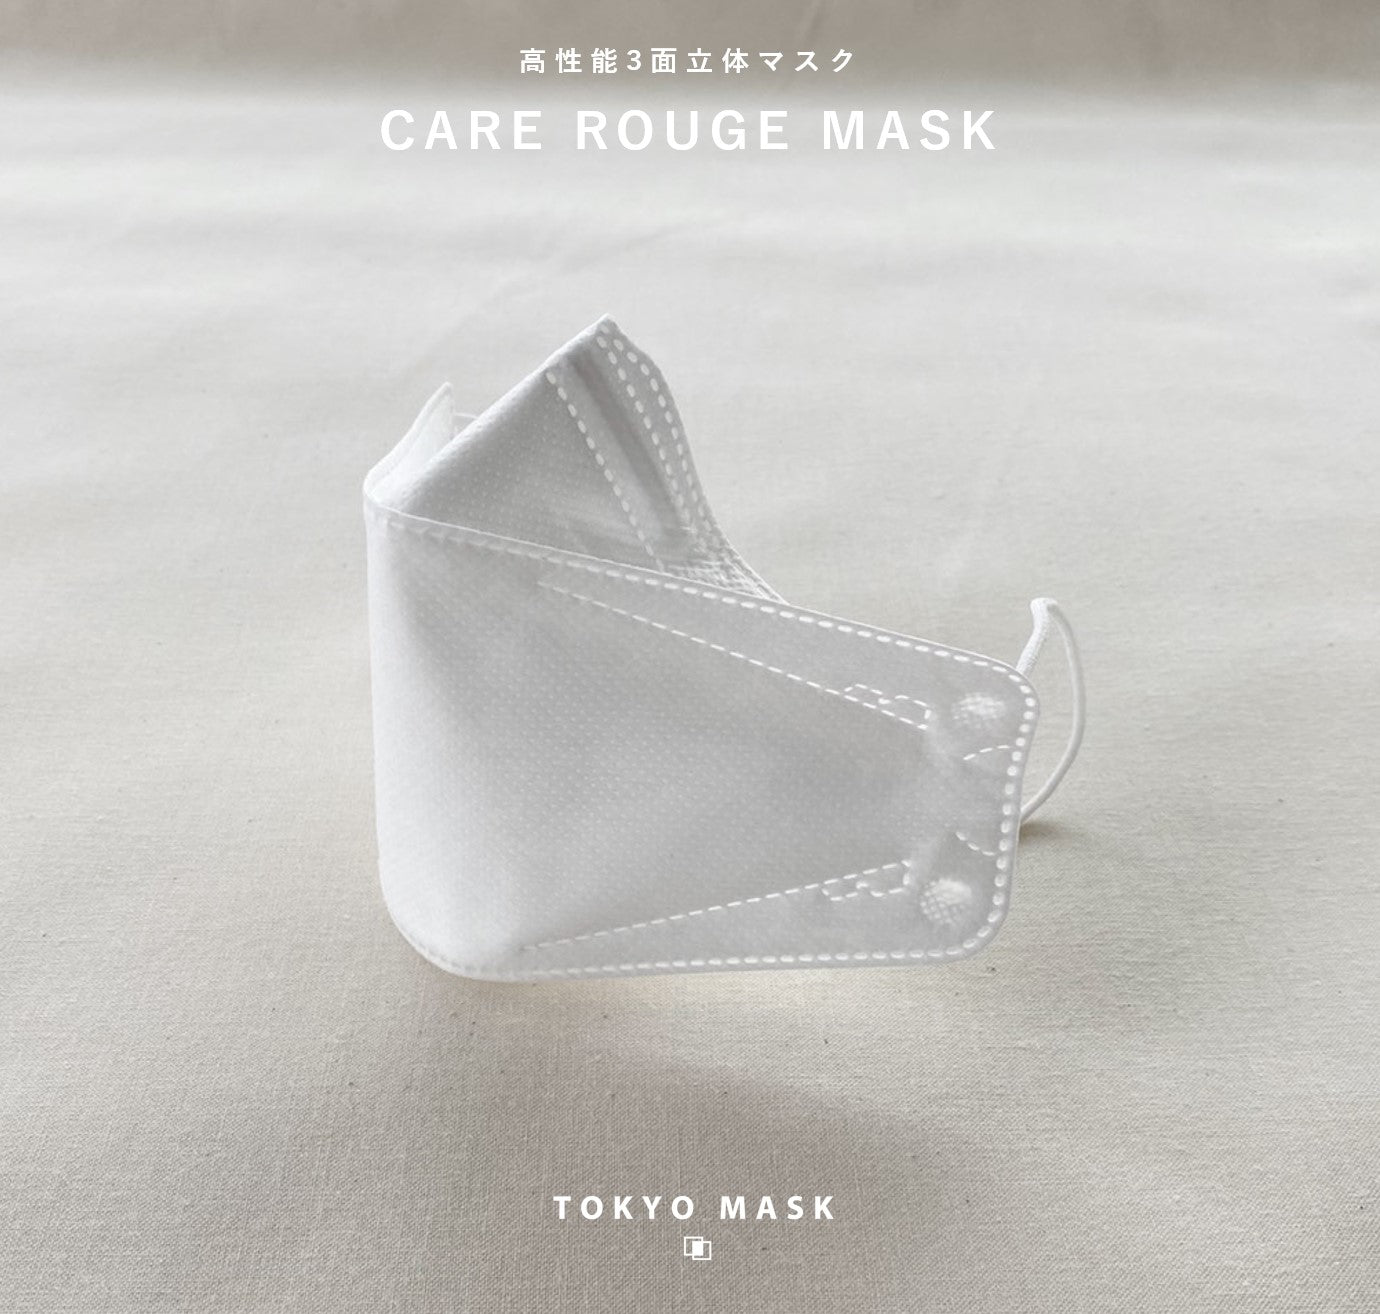 CARE ROUGE MASK